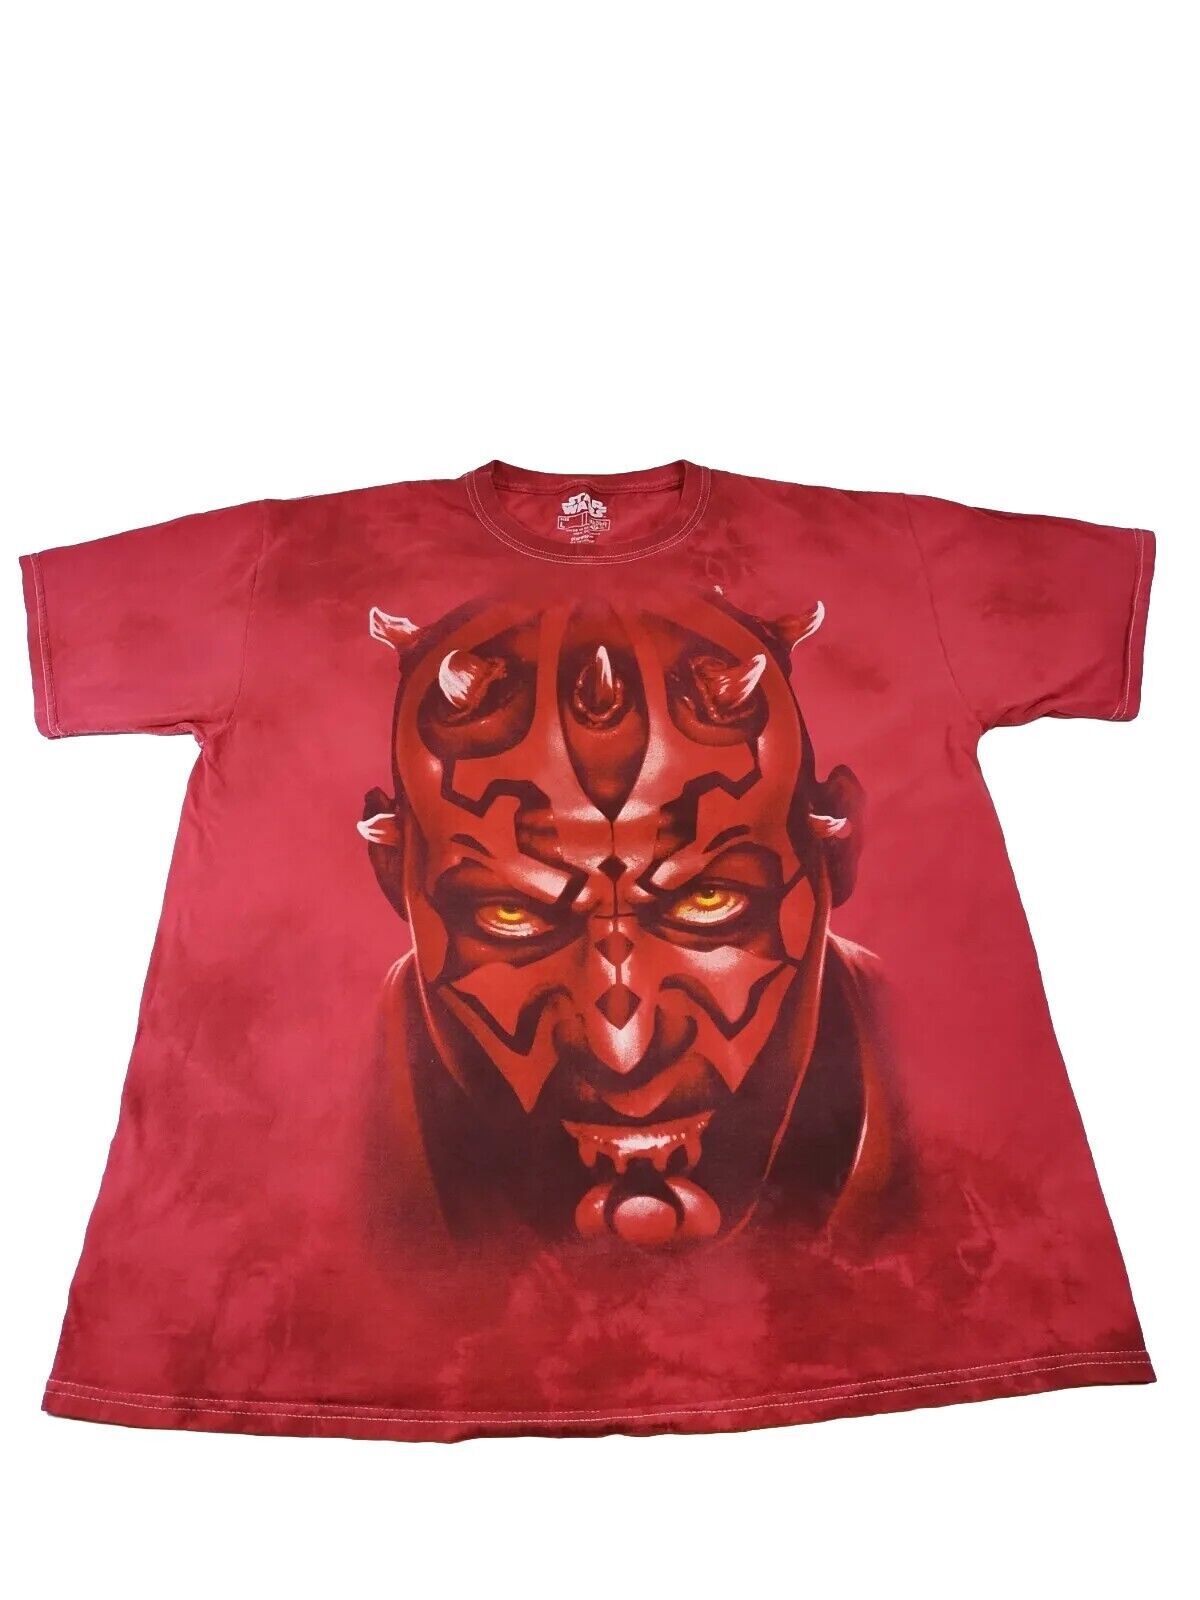 Star Wars T-Shirt Darth Maul Men's Size Large Tie Dye Red Full Graphic